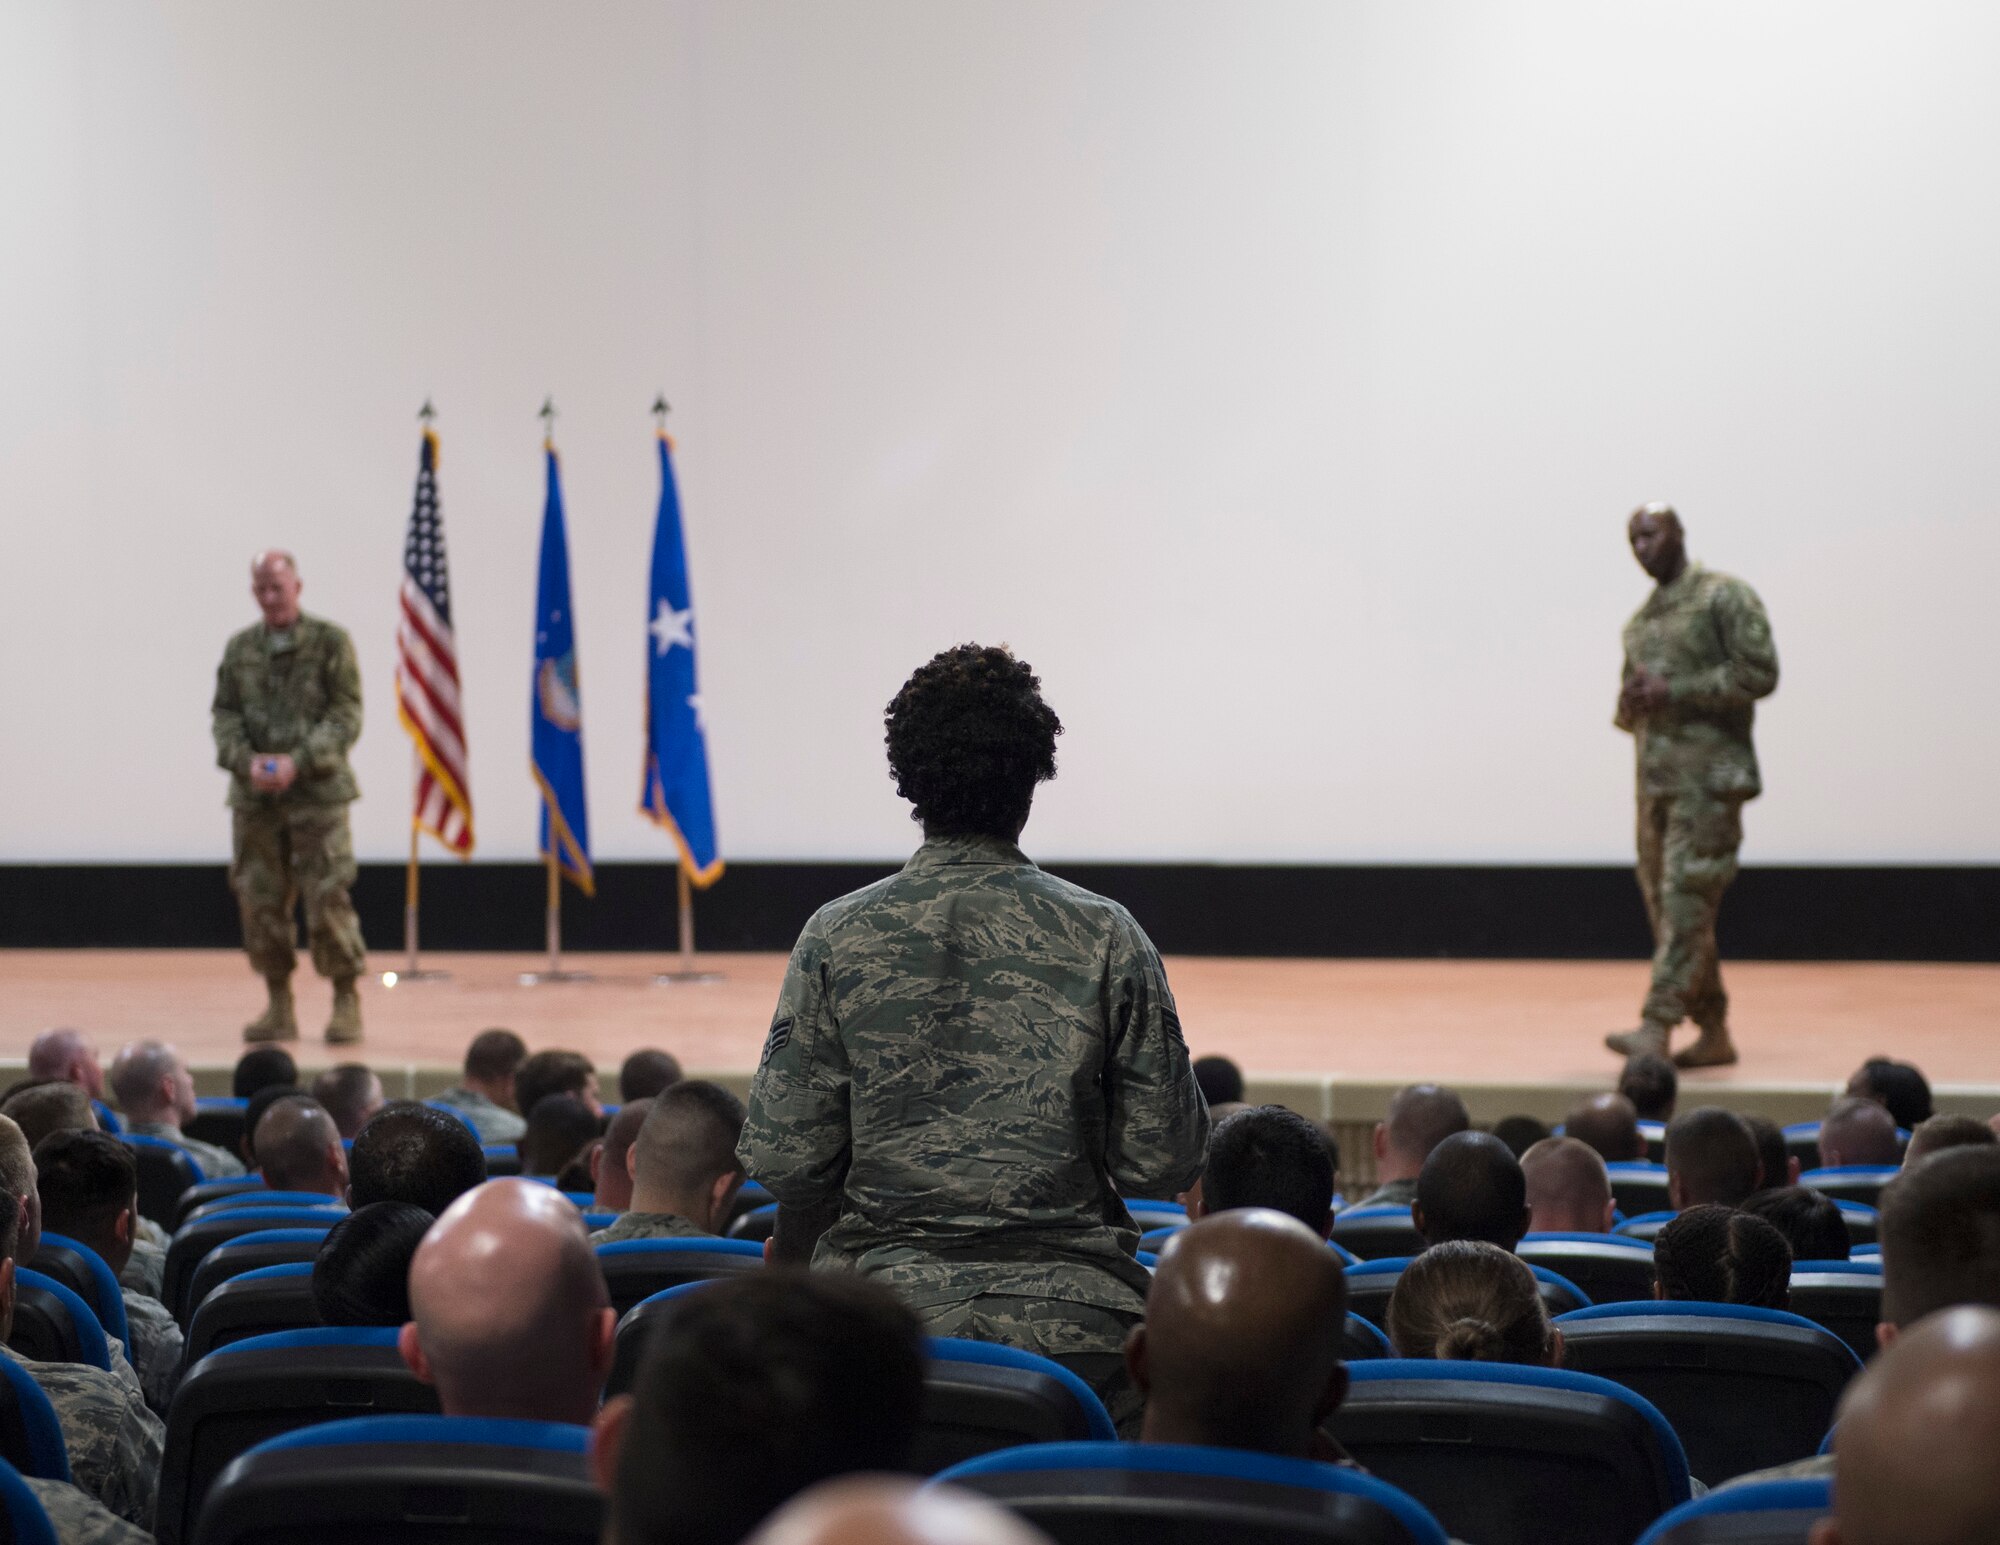 U.S. Air Force Vice Chief of Staff Gen. Stephen W. Wilson and Chief Master Sgt. of the Air Force Kaleth O. Wright take questions from the audience during an Airman’s call at Al Udeid Air Base, Qatar, April 12, 2017. Throughout the Airman’s call, Wilson and Wright spoke about the upcoming changes to Air Force policies and the importance of the Airmen’s mission at the 379th Air Expeditionary Wing. (U.S. Air Force photo by Tech. Sgt. Amy M. Lovgren)